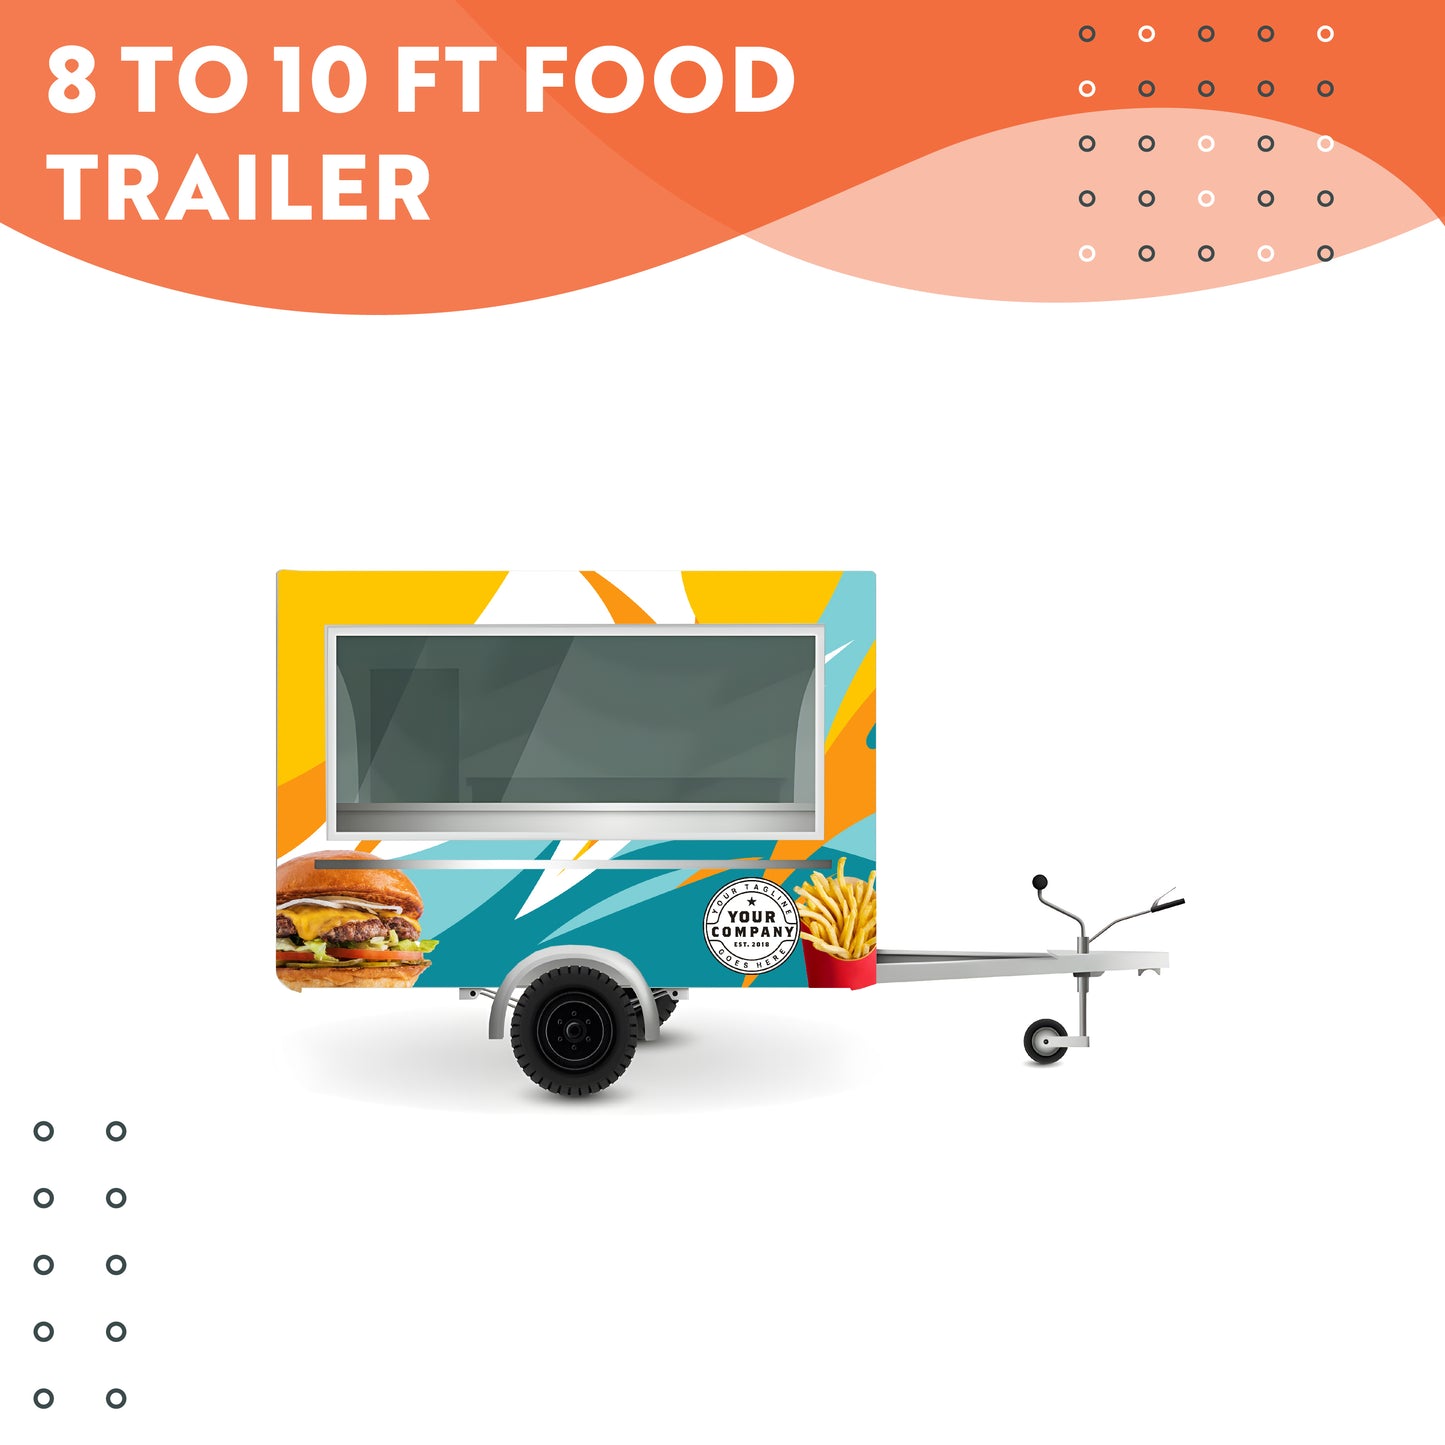 8 to 10 ft Food Trailer